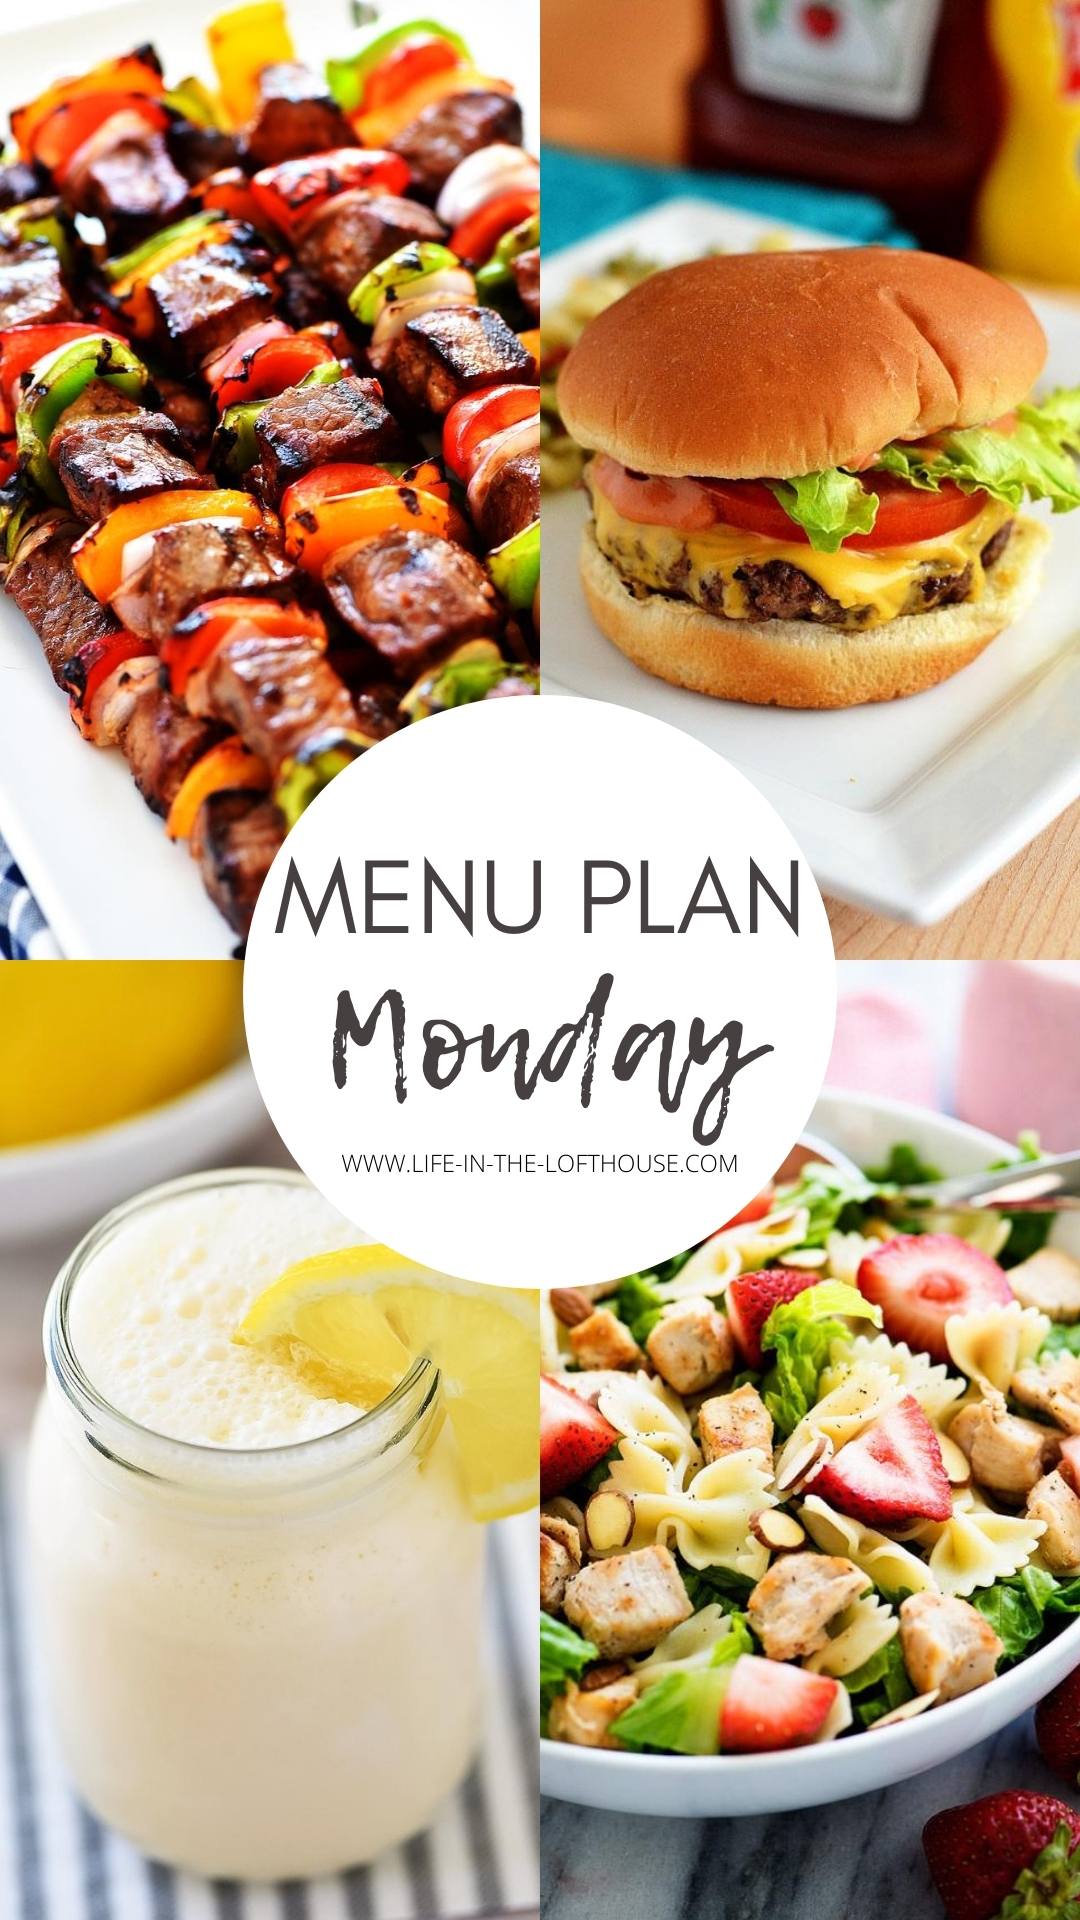 Menu Plan Monday is a three step guide to getting home cooked meals on the table for your family. Each menu includes six dinner recipes and one dessert. Life-in-the-Lofthouse.com